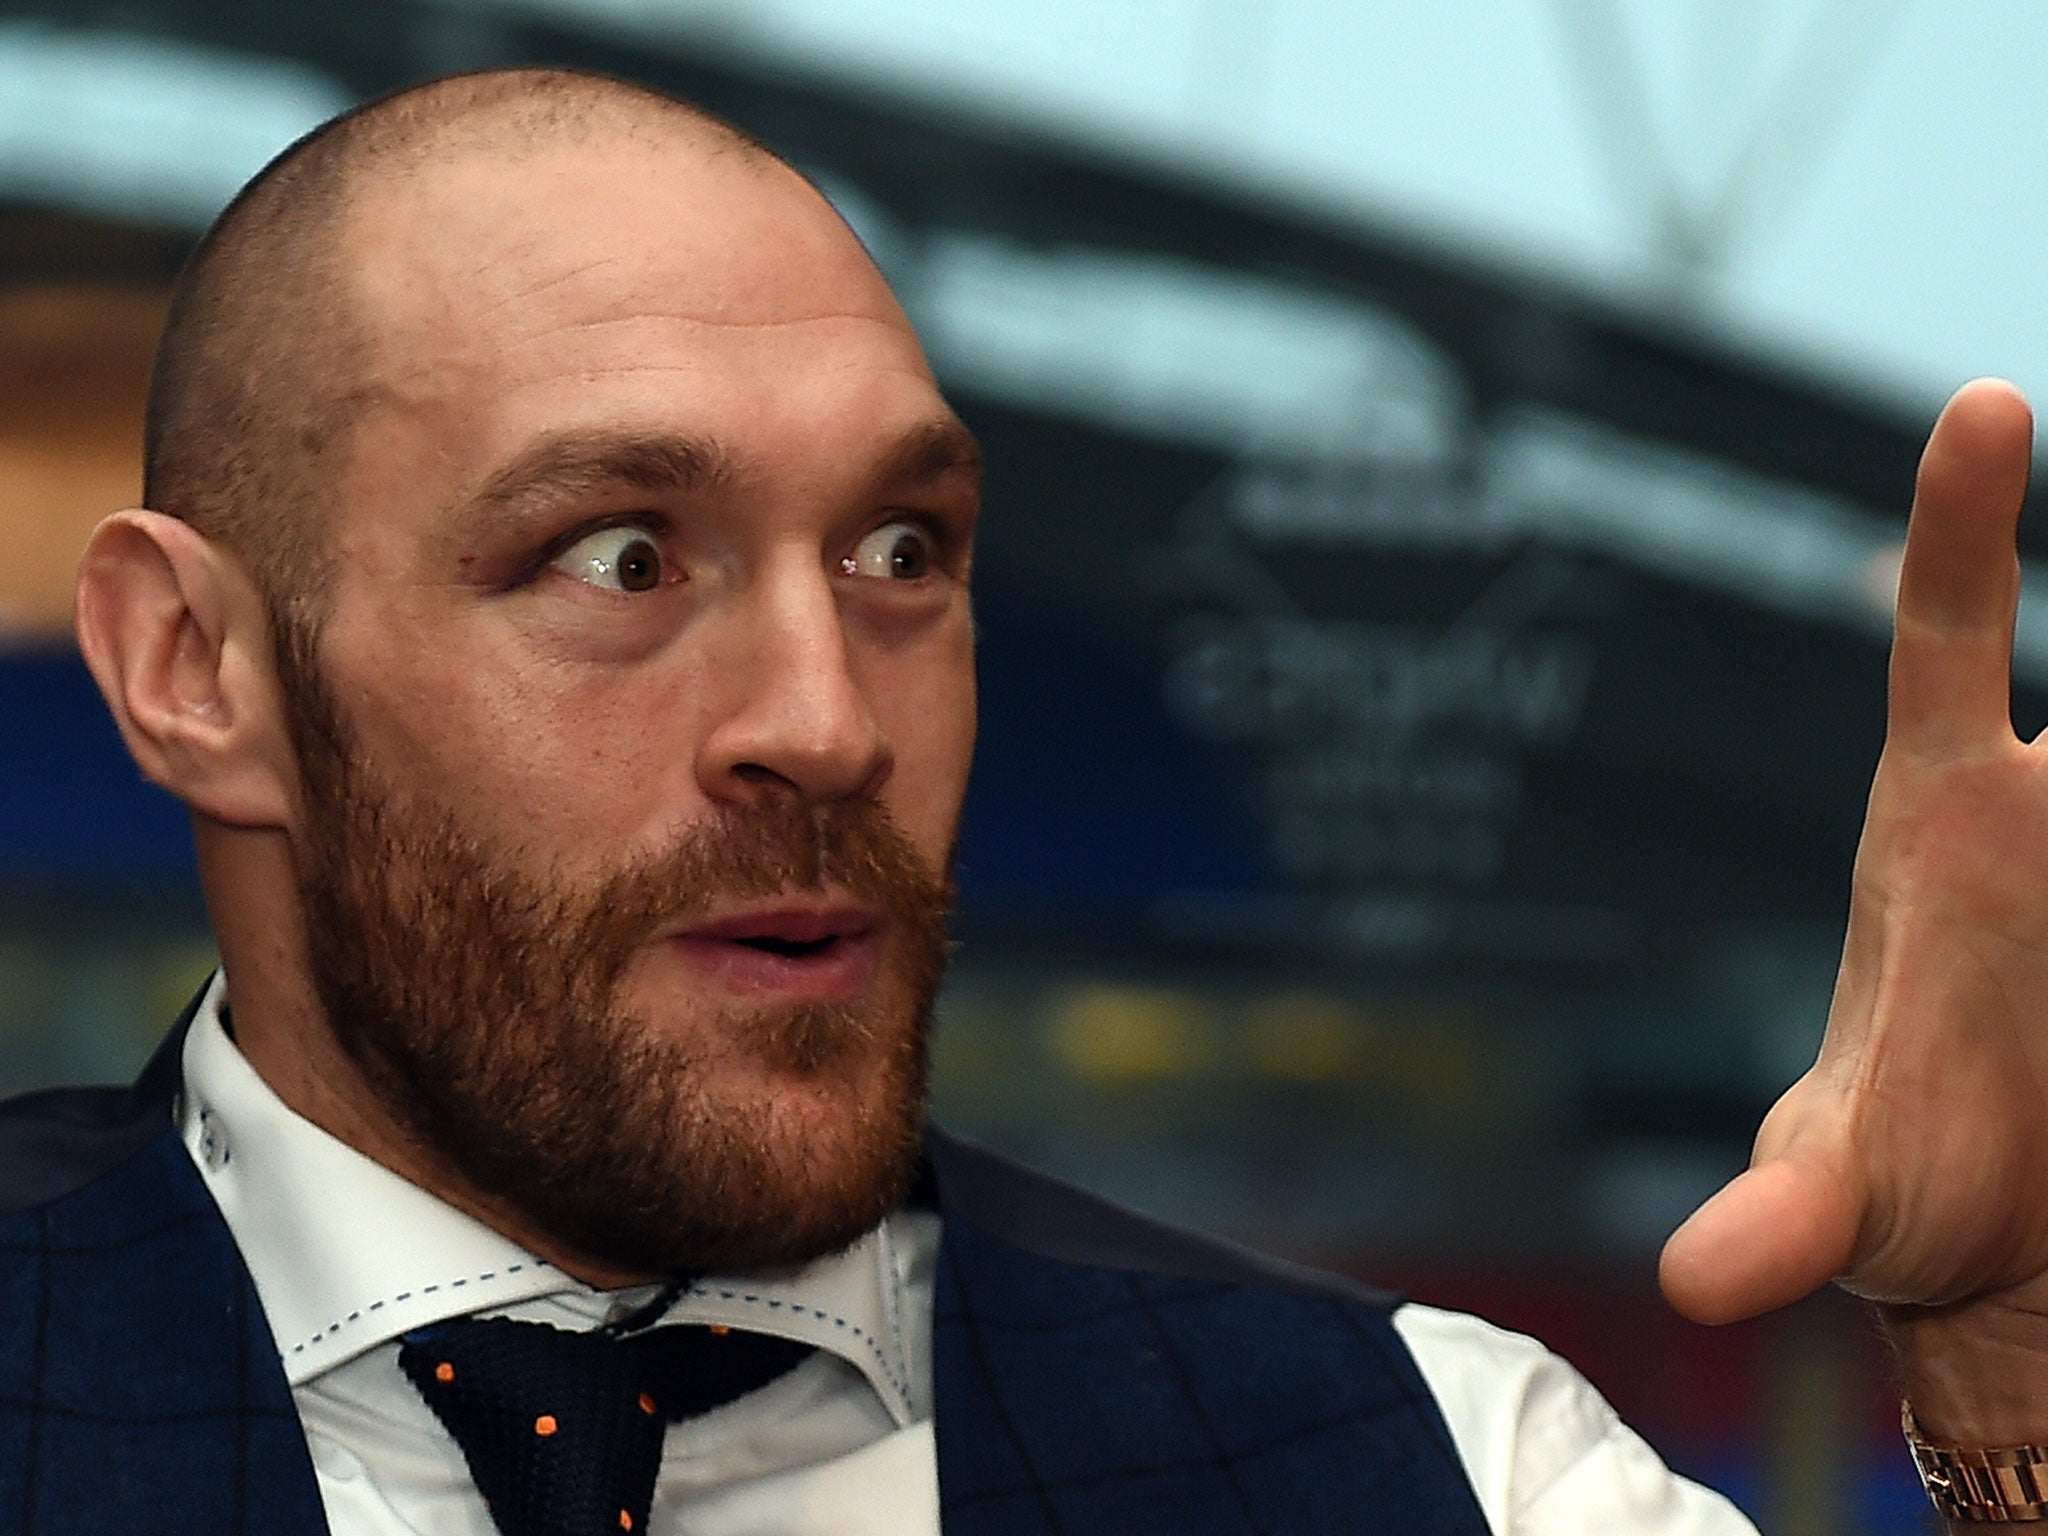 Tyson Fury has been cleared by police over an allegation of hate crimes